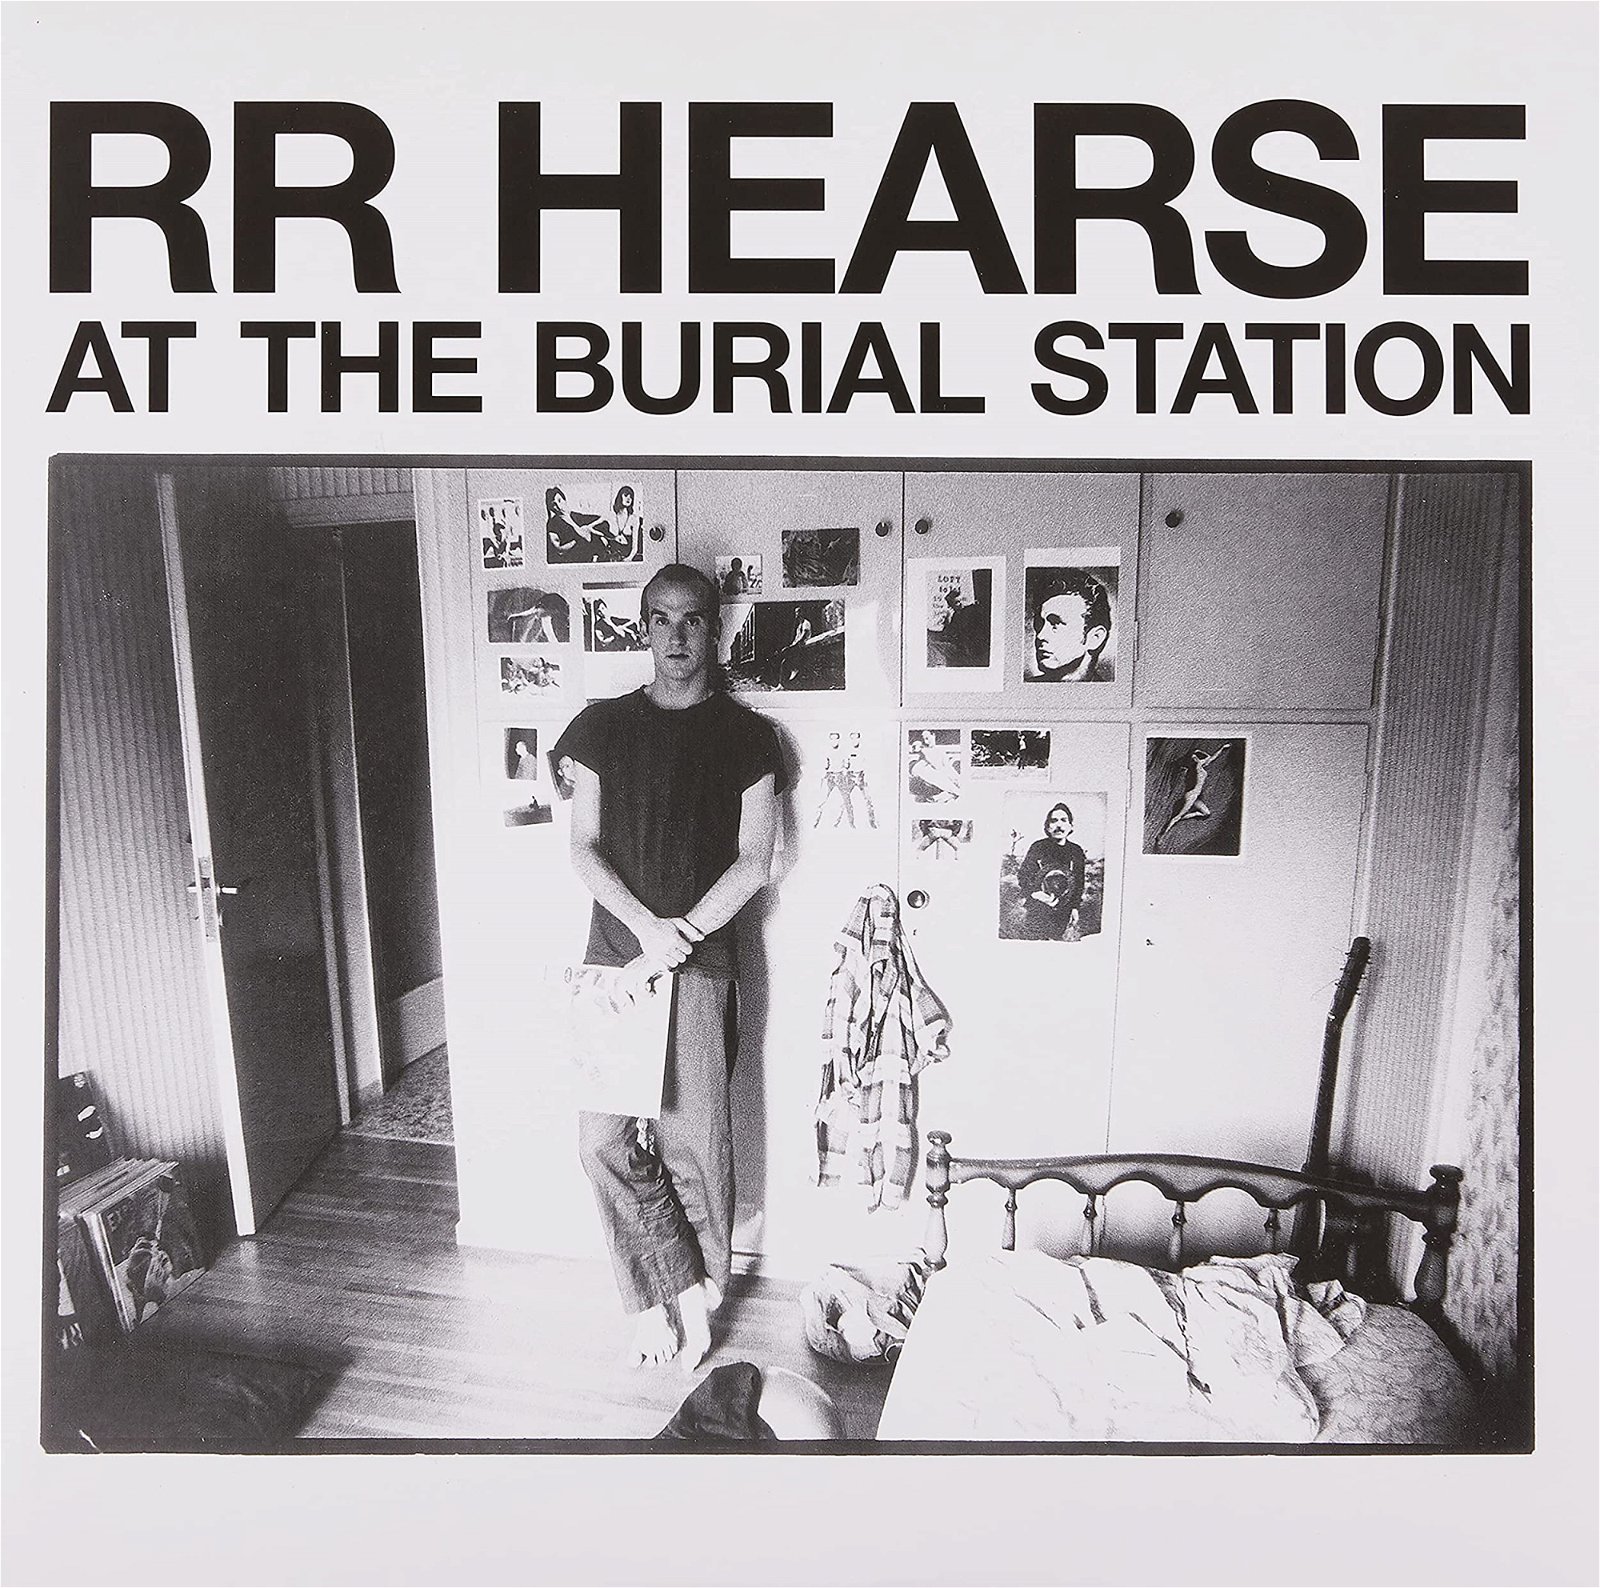 CD Shop - HEARSE, R.R. AT THE BURIAL STATION